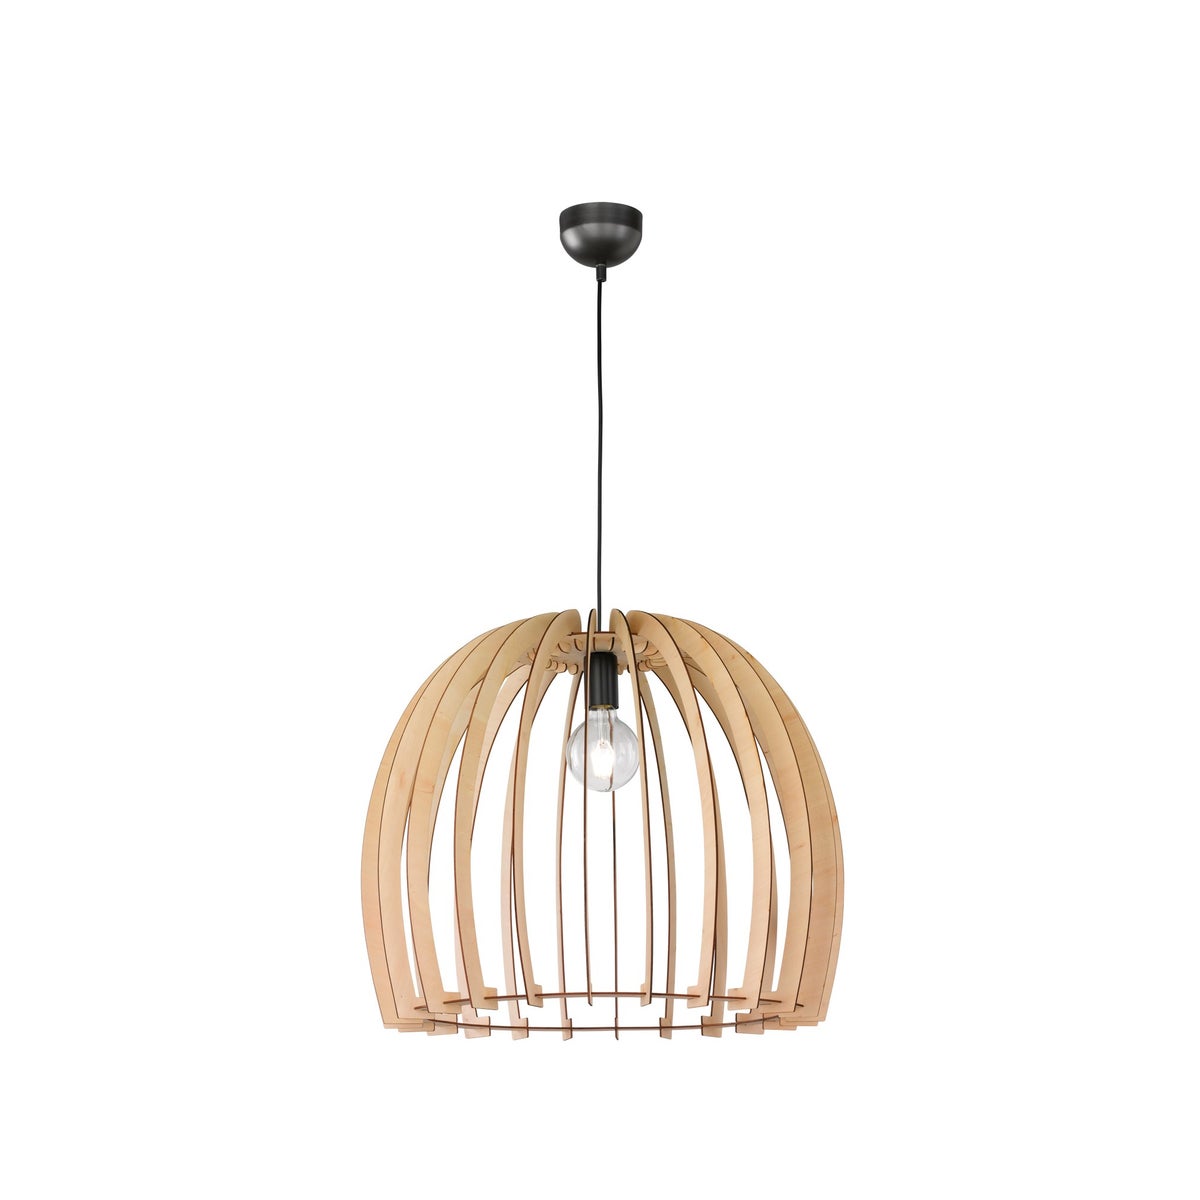 Pendant Inc Wood Color Dome Shade deals | ArnsbergerLicht - Large Wood in with